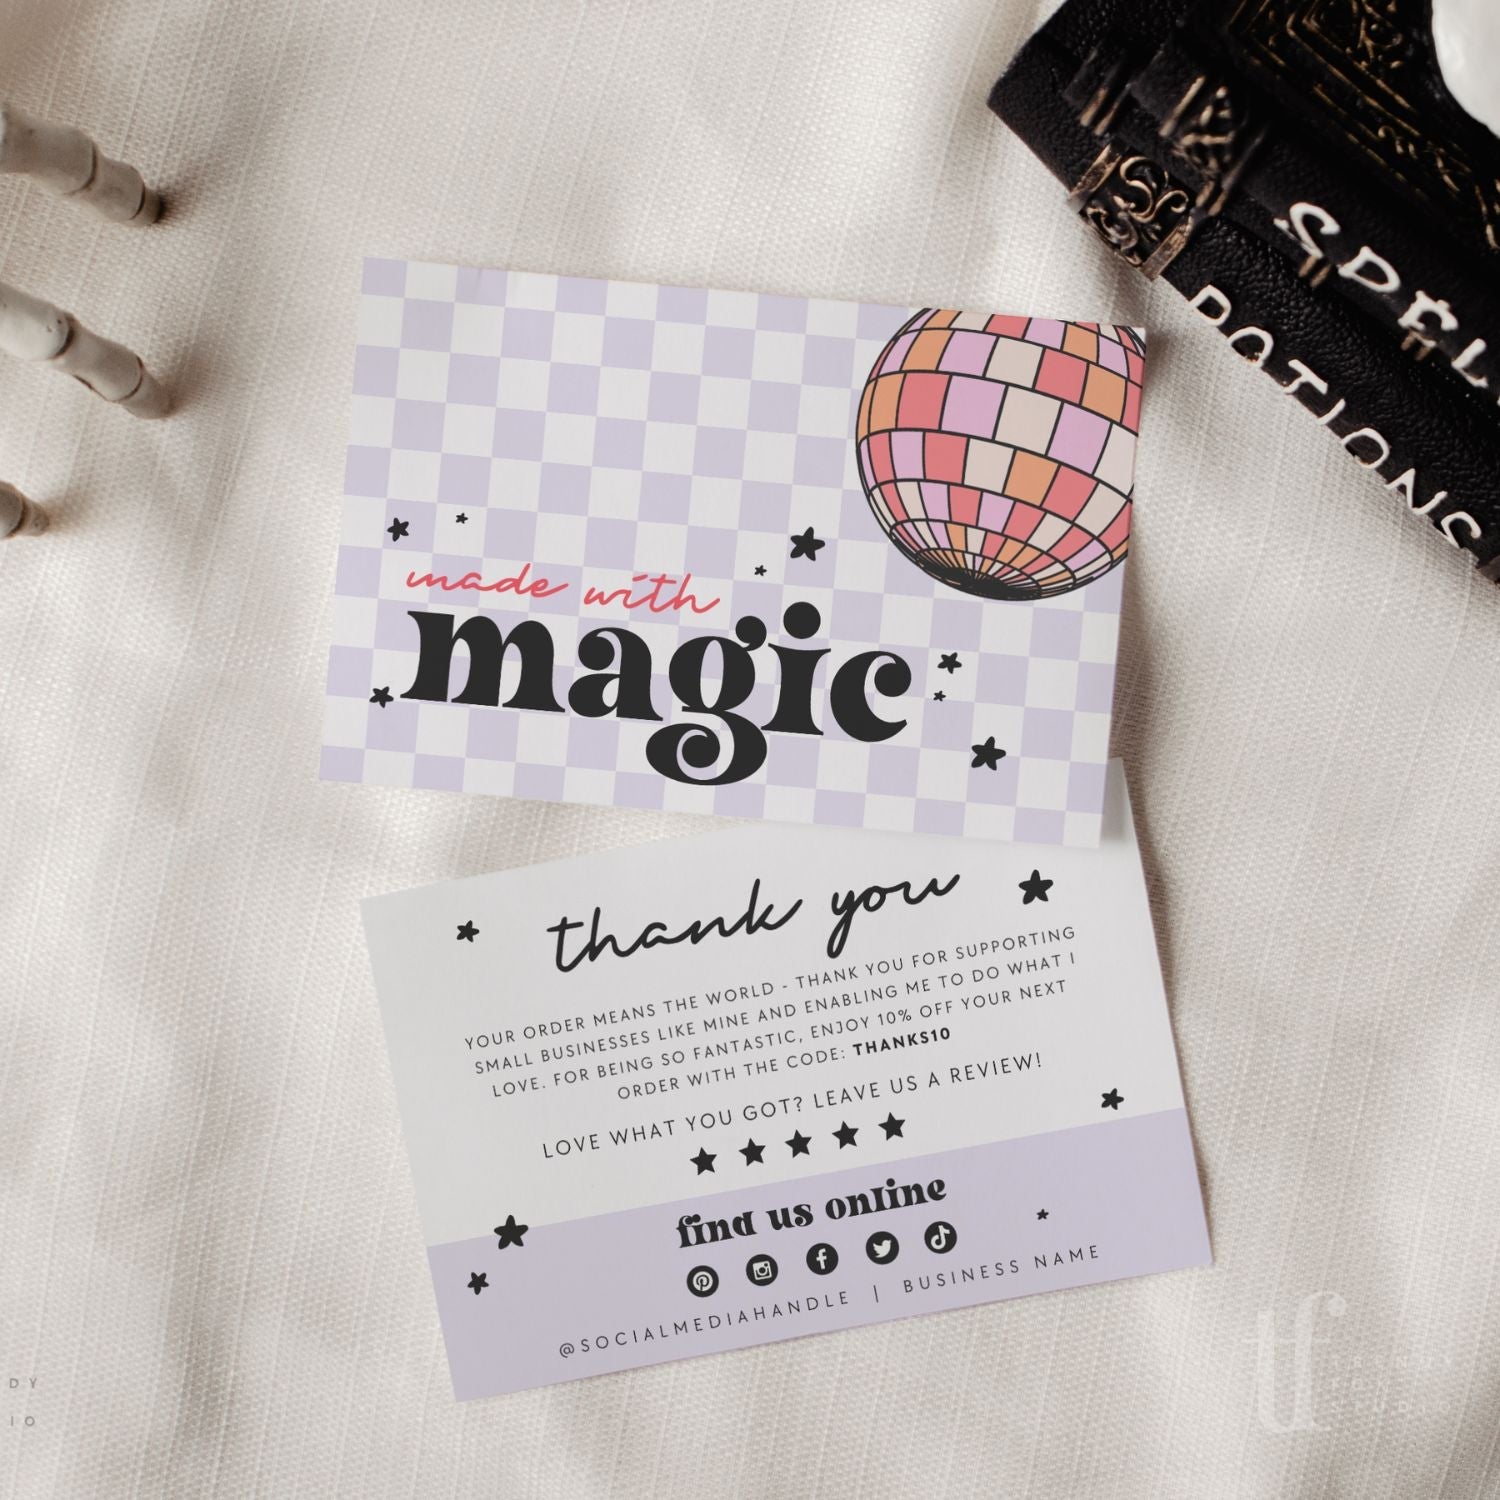 Made with Magic Pastel Halloween Business Thank You Card Editable Canva Template | Order Thank You - Trendy Fox Studio